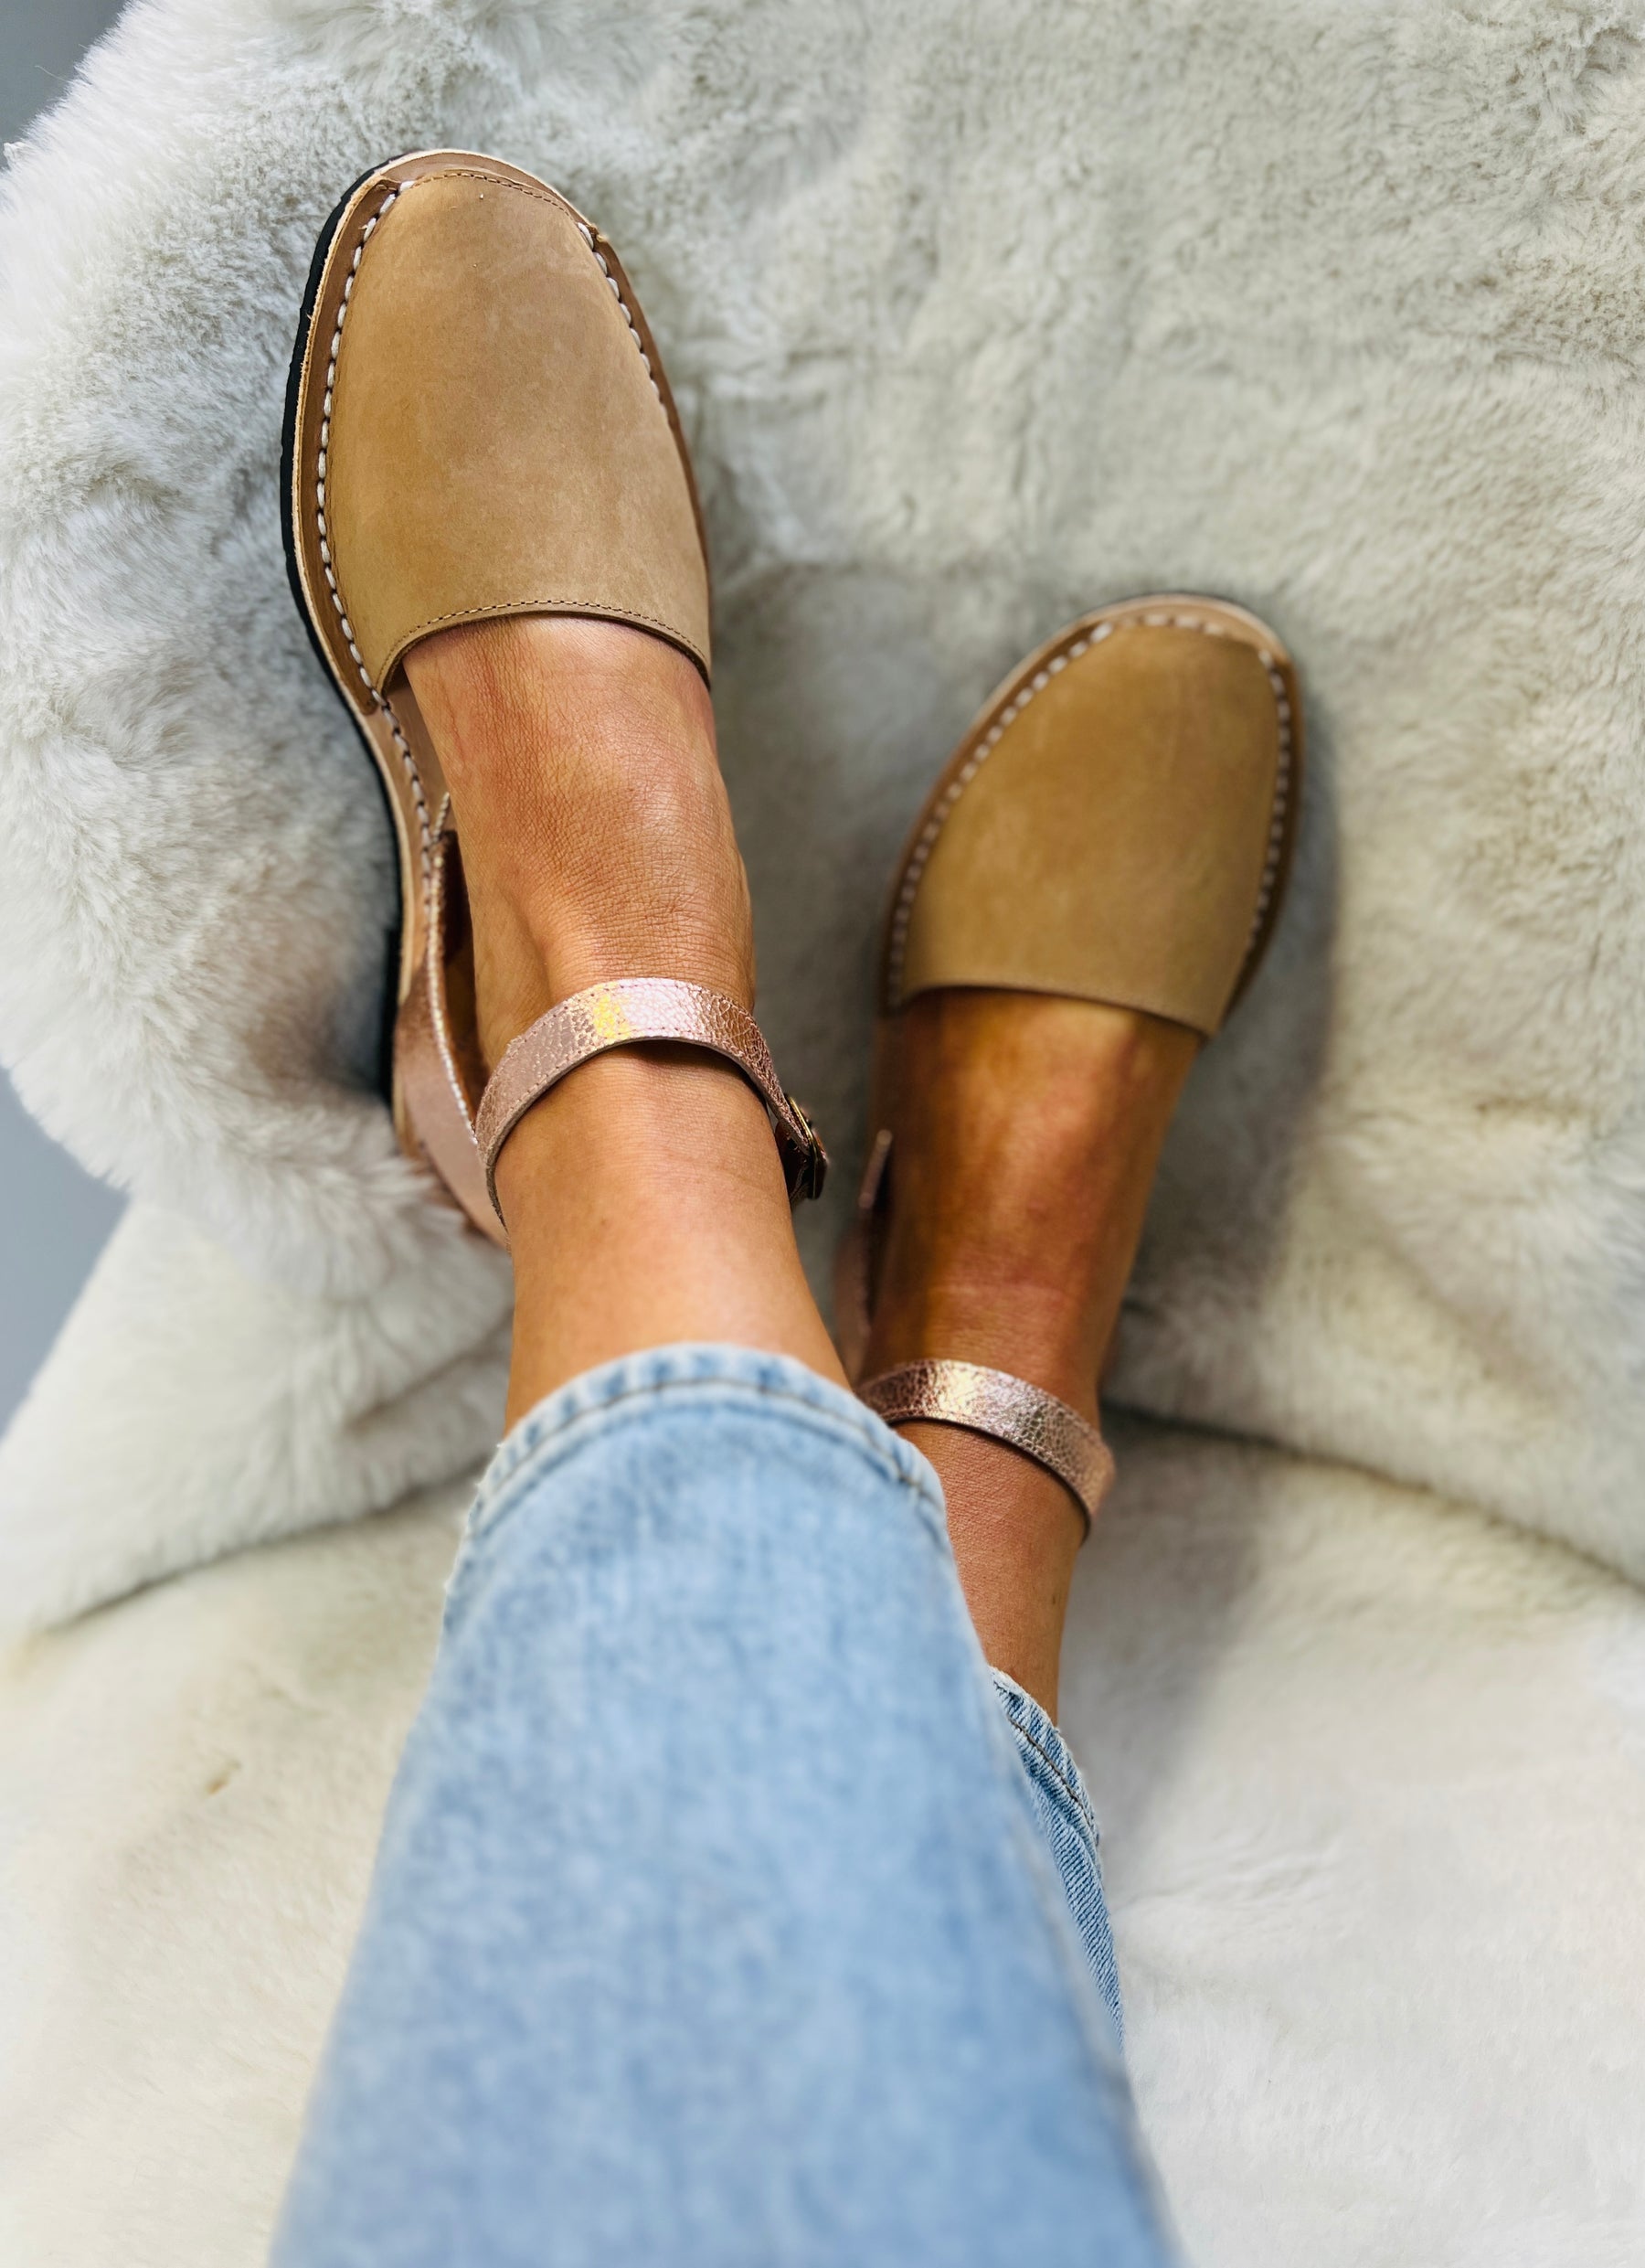 Tan nubuck Menorcan Avarca sandals with rose gold backstrap and detachable ankle strap, easy to wear slip-on summer sandals with the extra security of an ankle fastening.